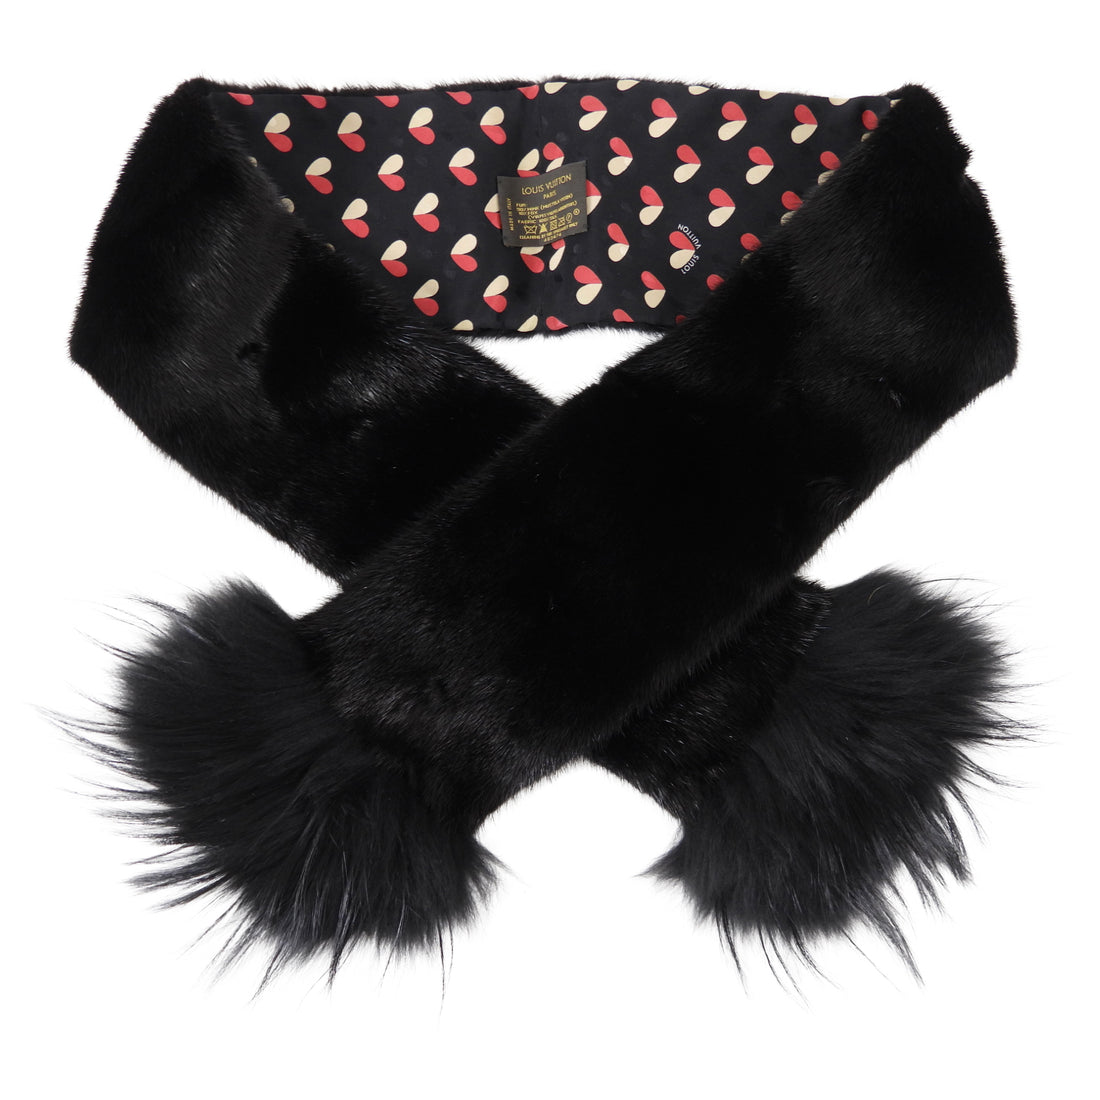 Louis Vuitton Black Mink Fur Scarf with Red Silk Hearts